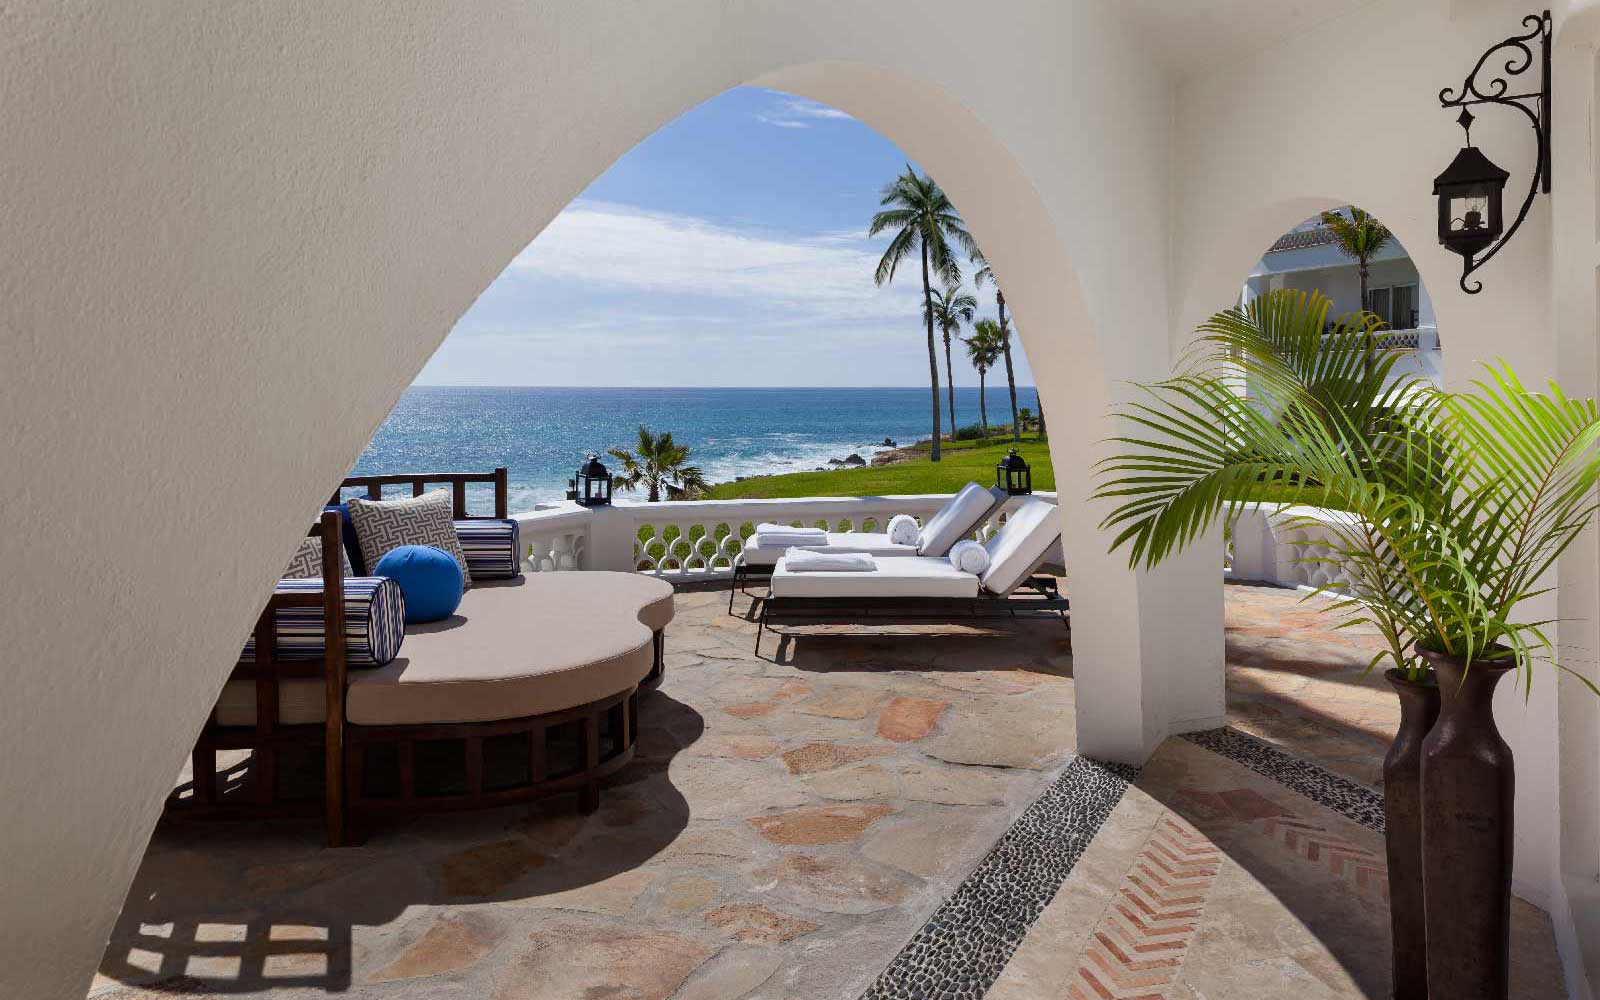 A View from the Balcony at the One&Only Palmilla Resort - Beautiful Homes